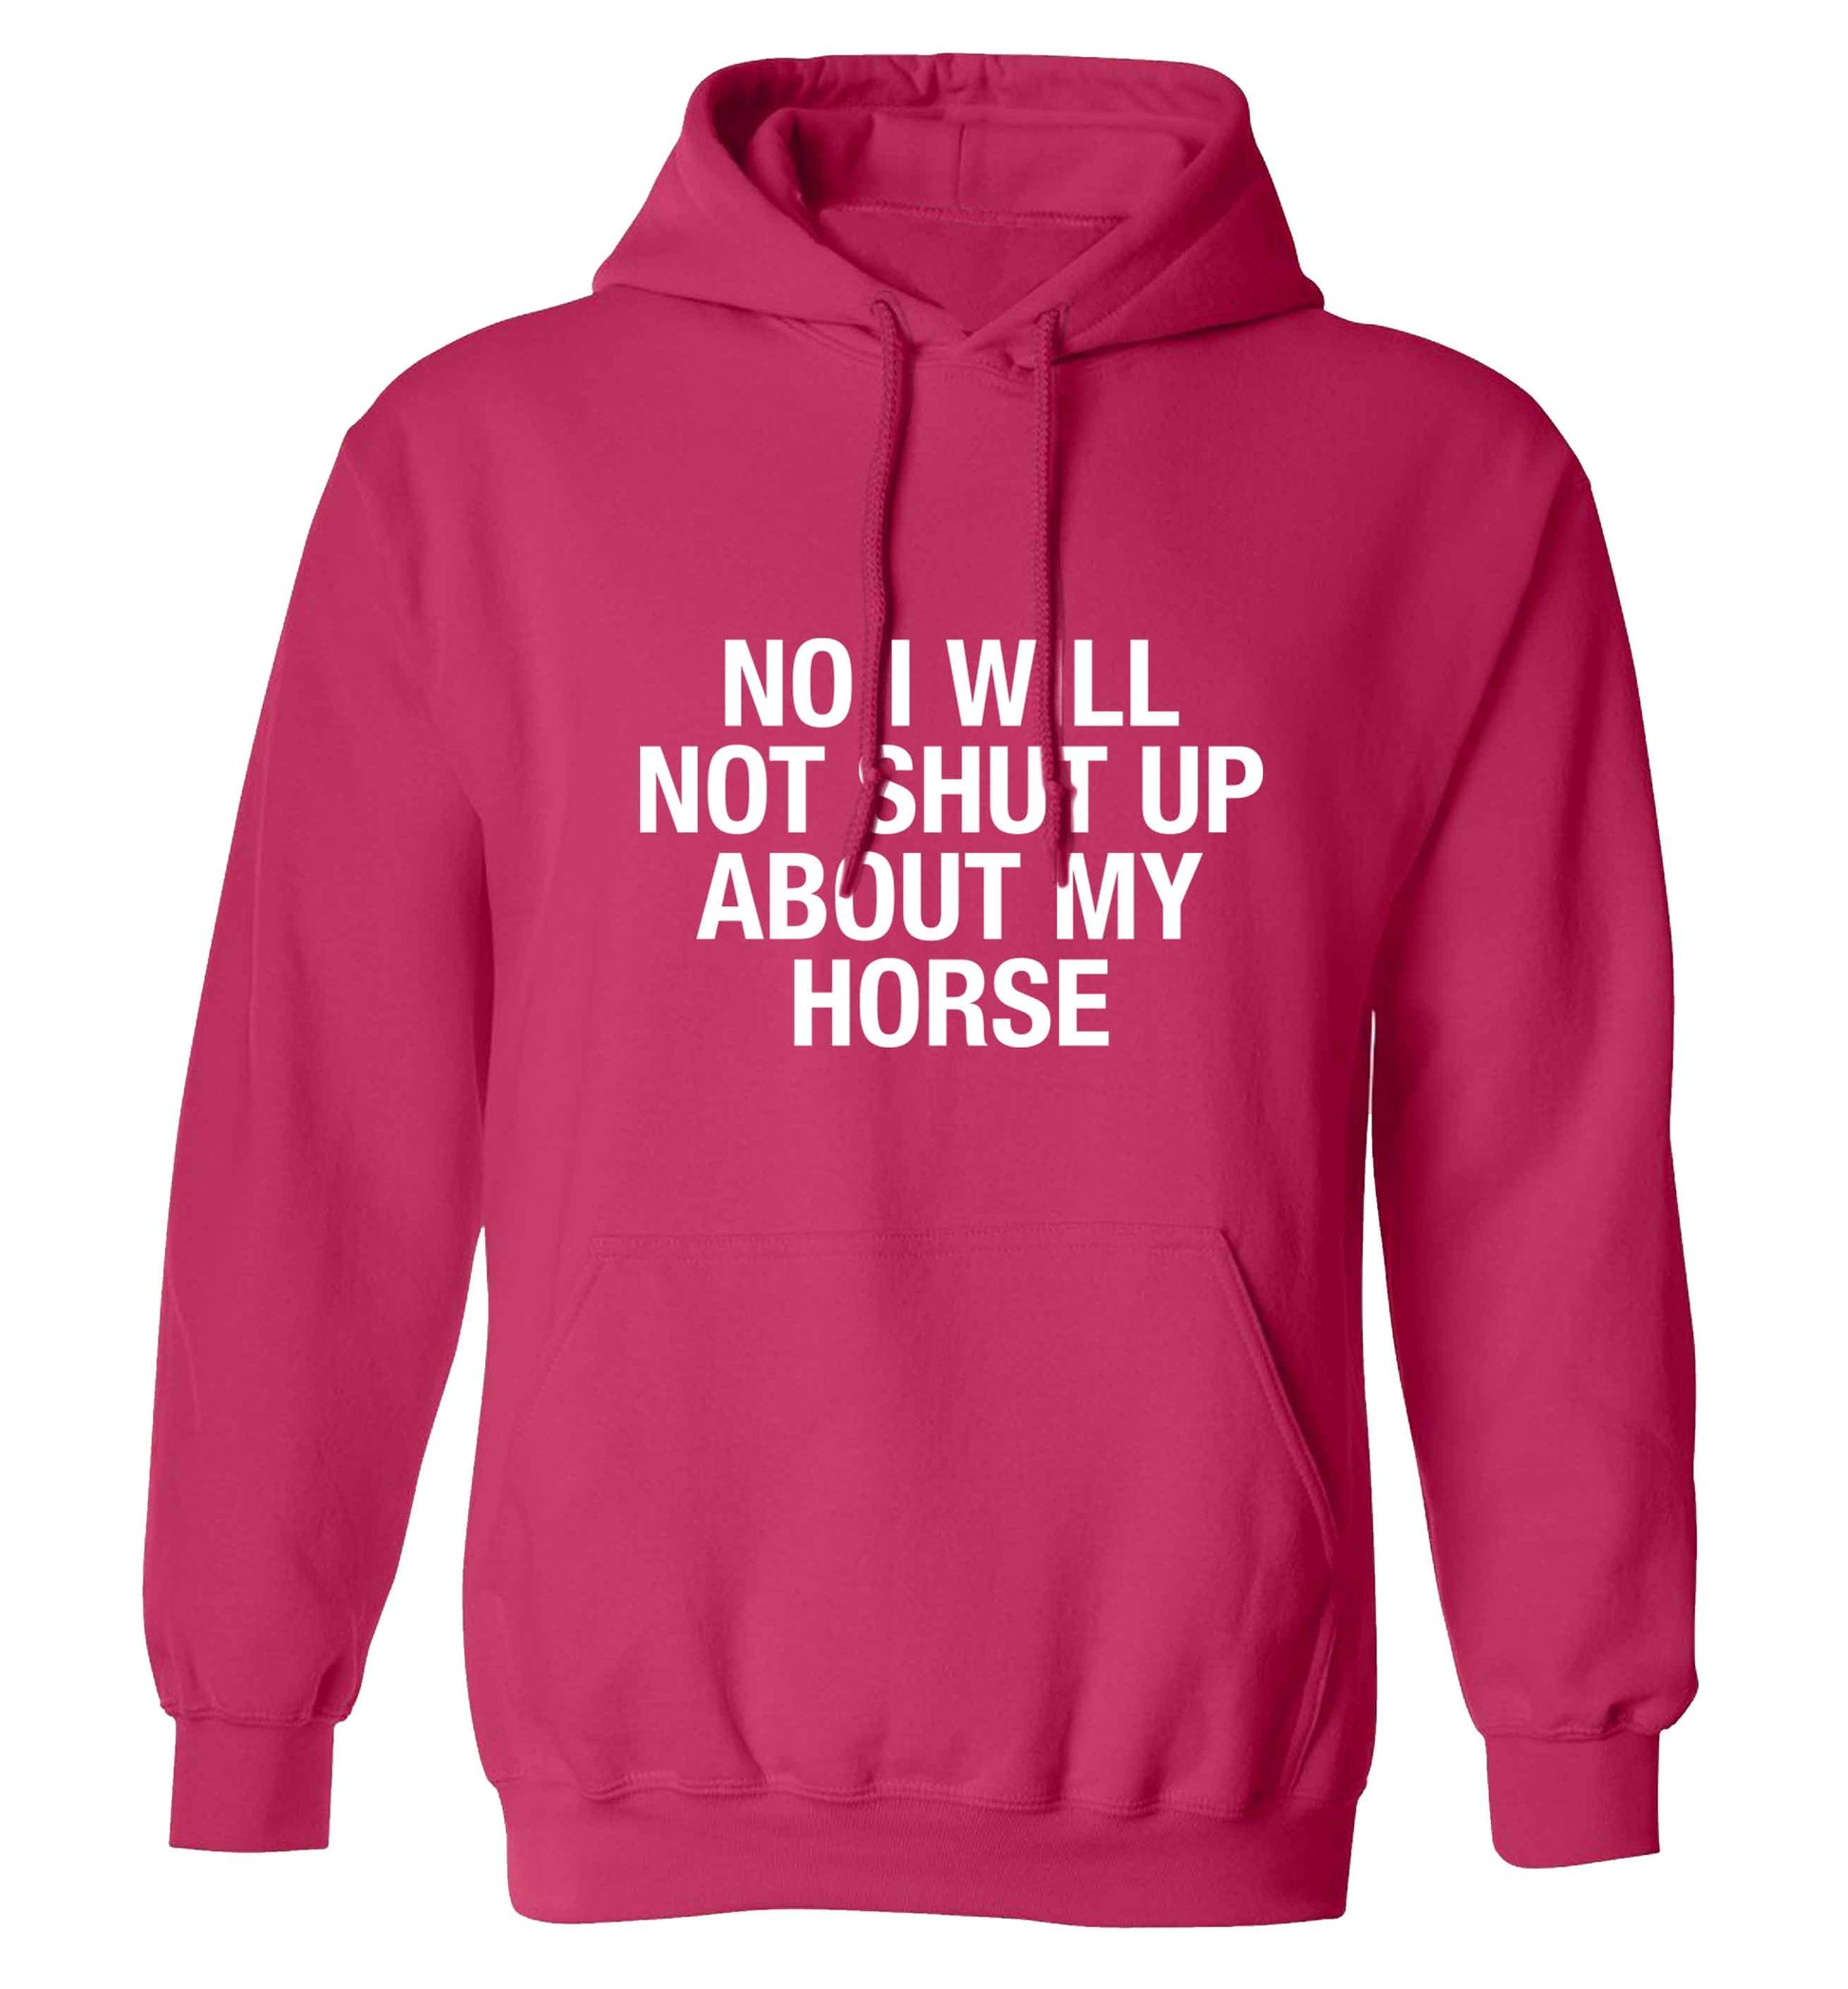 No I will not shut up talking about my horse adults unisex pink hoodie 2XL